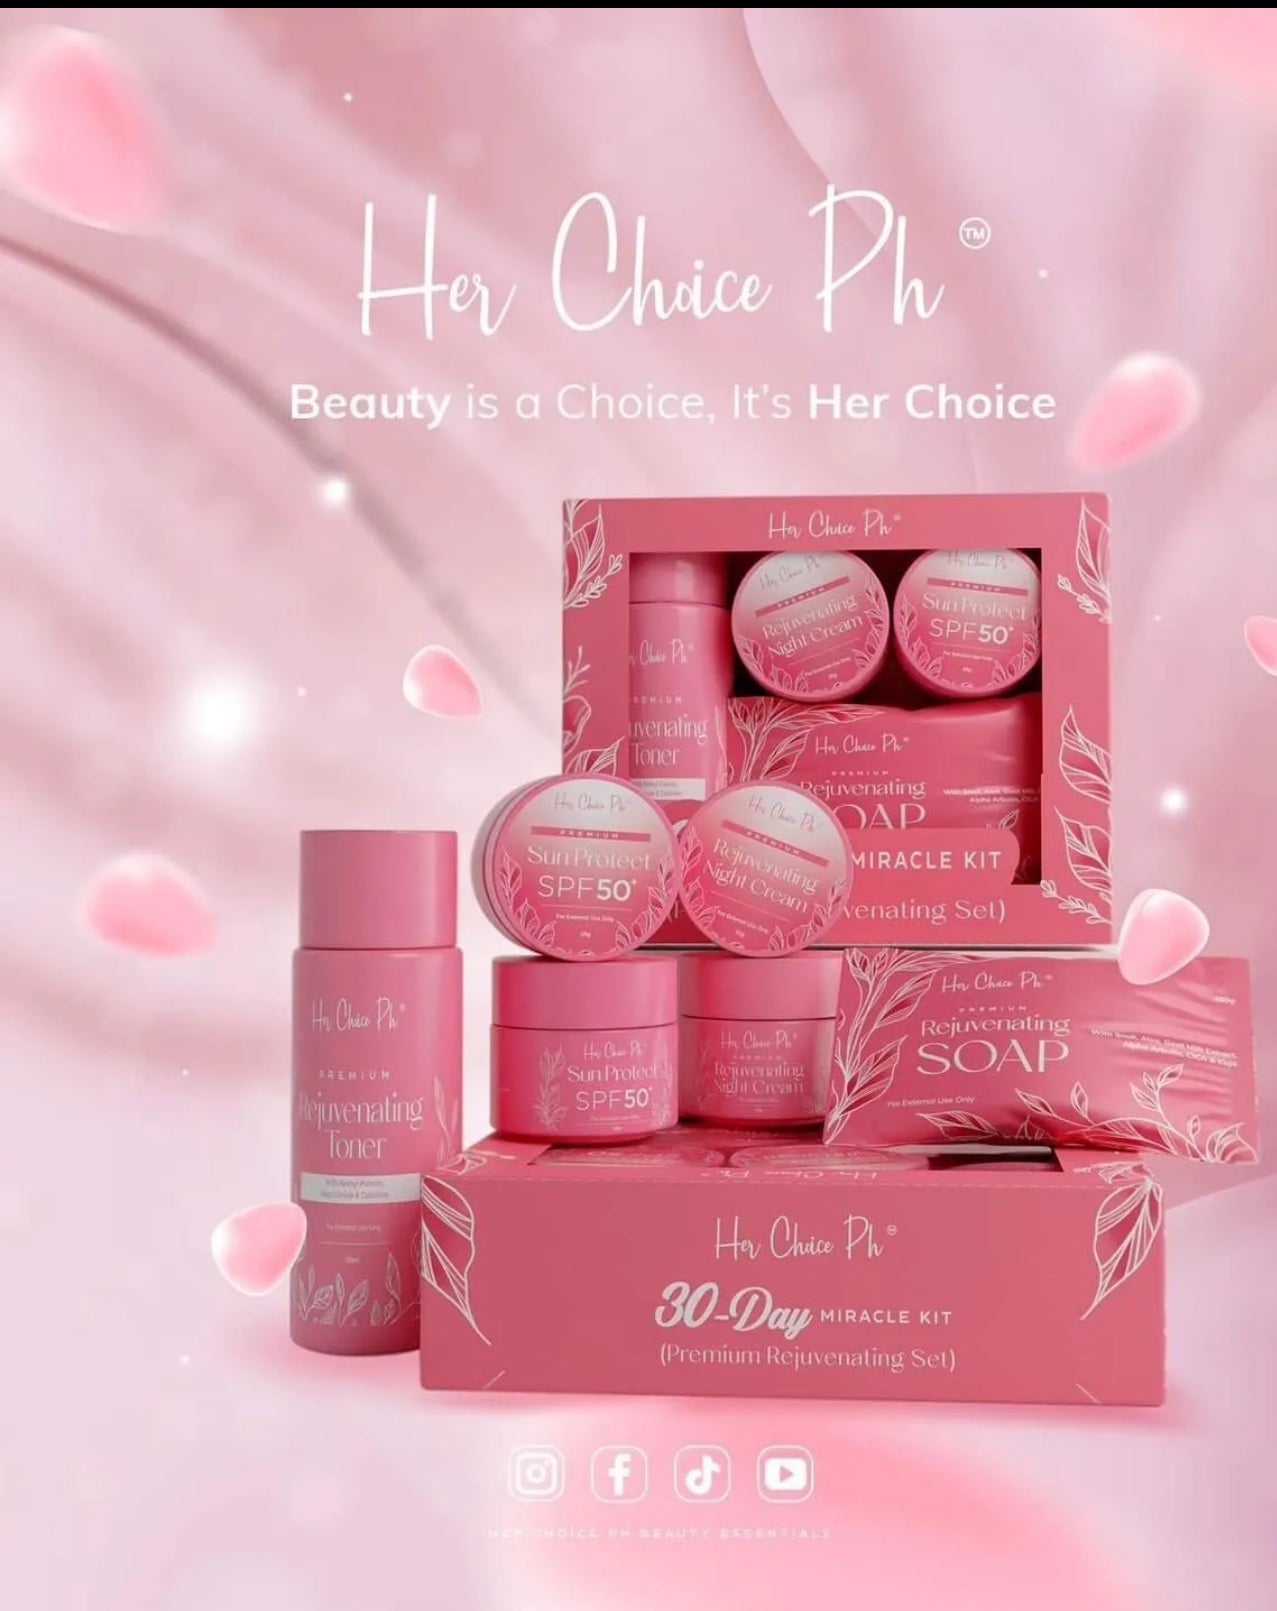 Her Choice Ph 30 Days Miracle Kit - True Beauty Skin Essentials